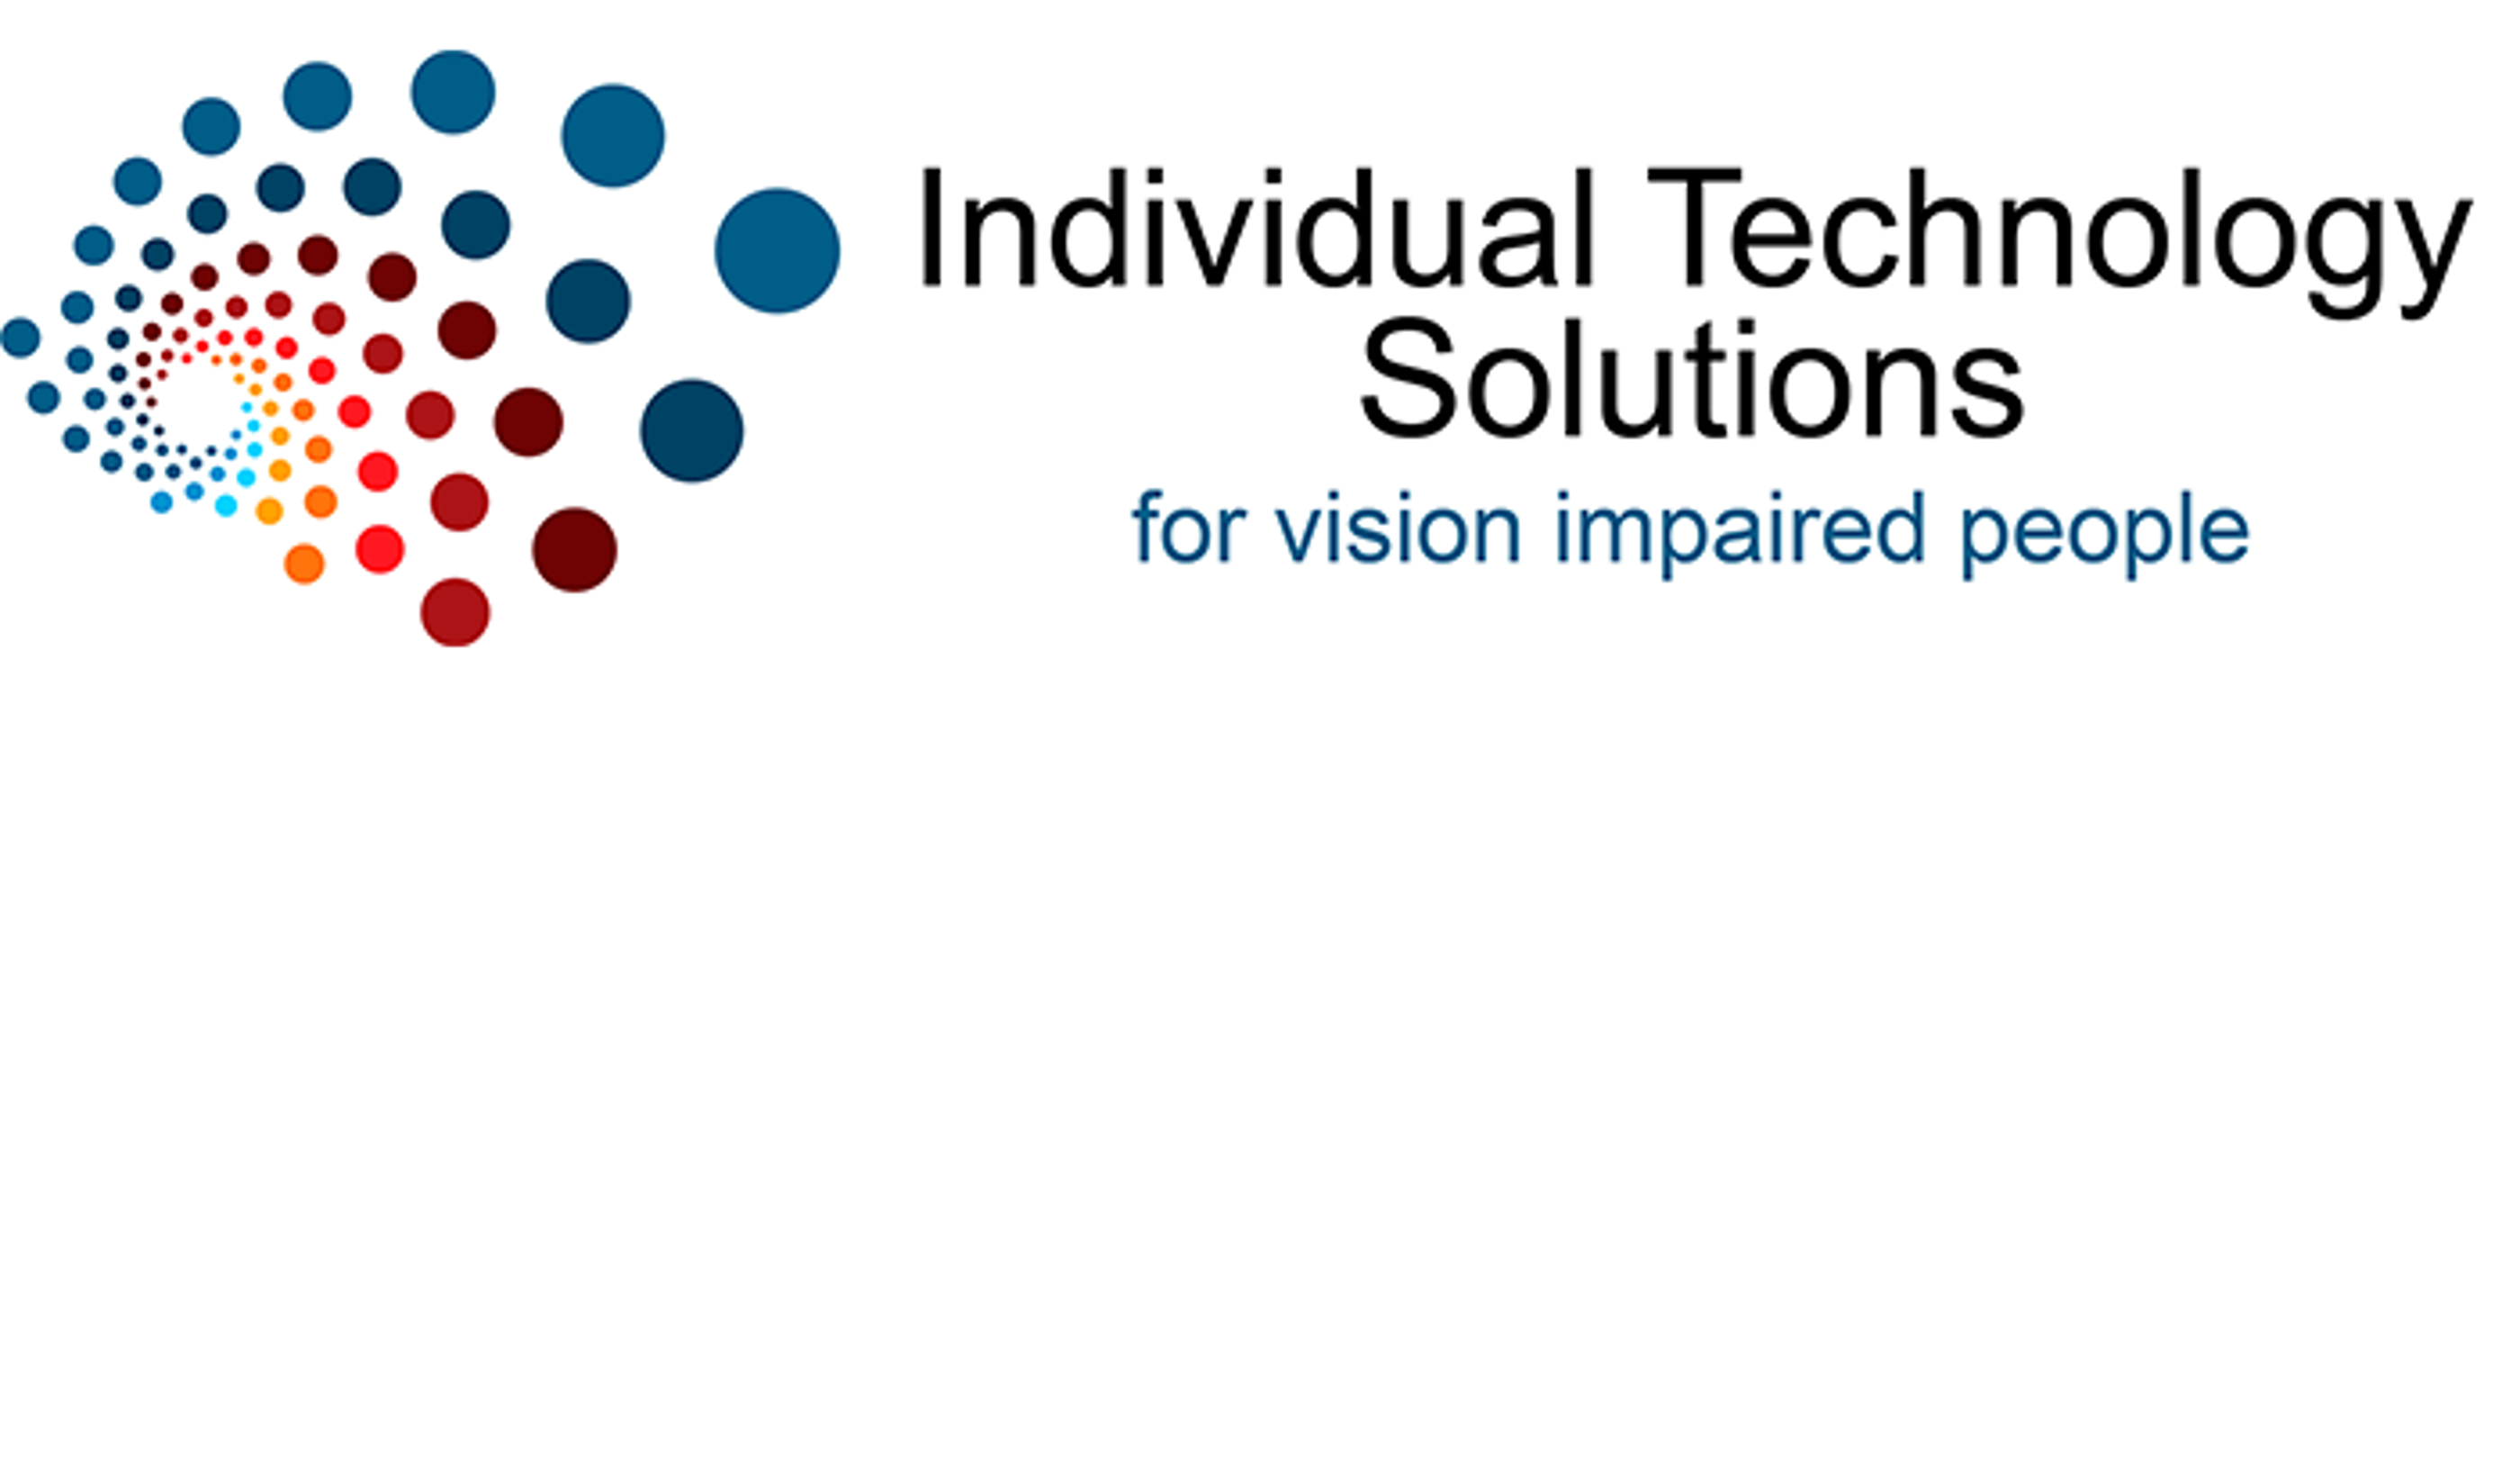 Individual technology solutions